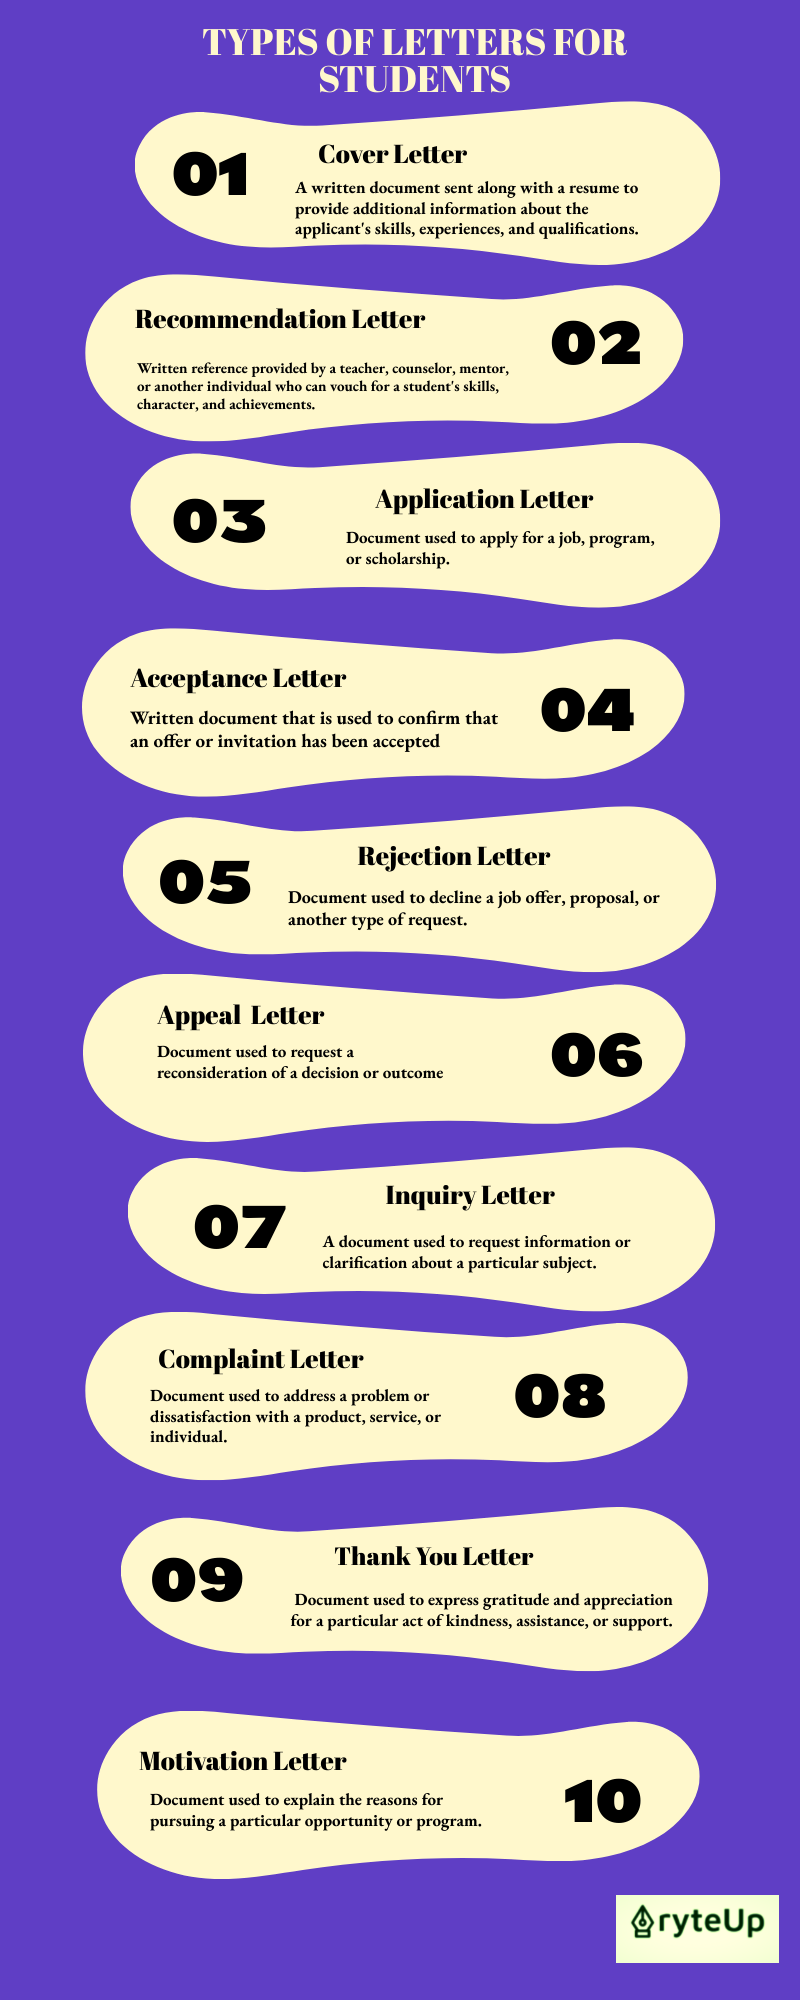 application letter definition and purpose